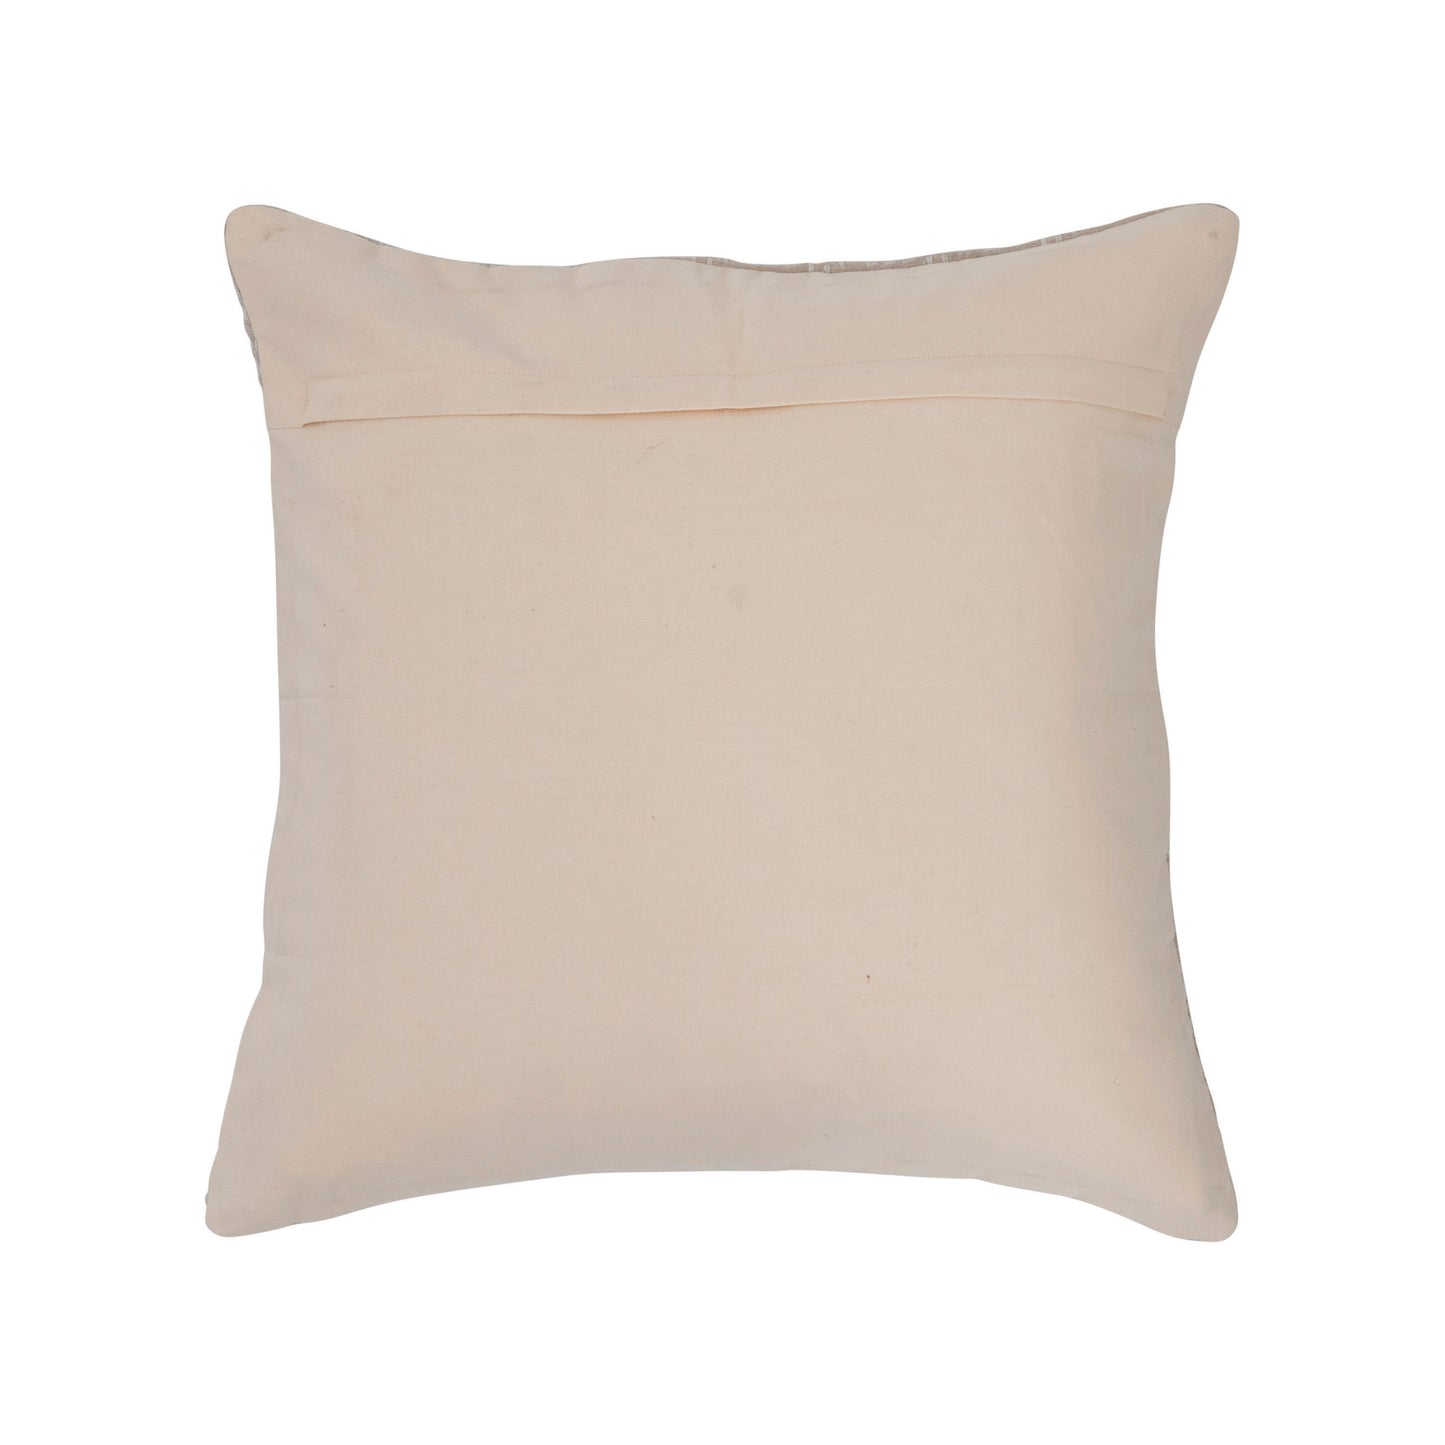 Woven Cotton Embroidered Pillow